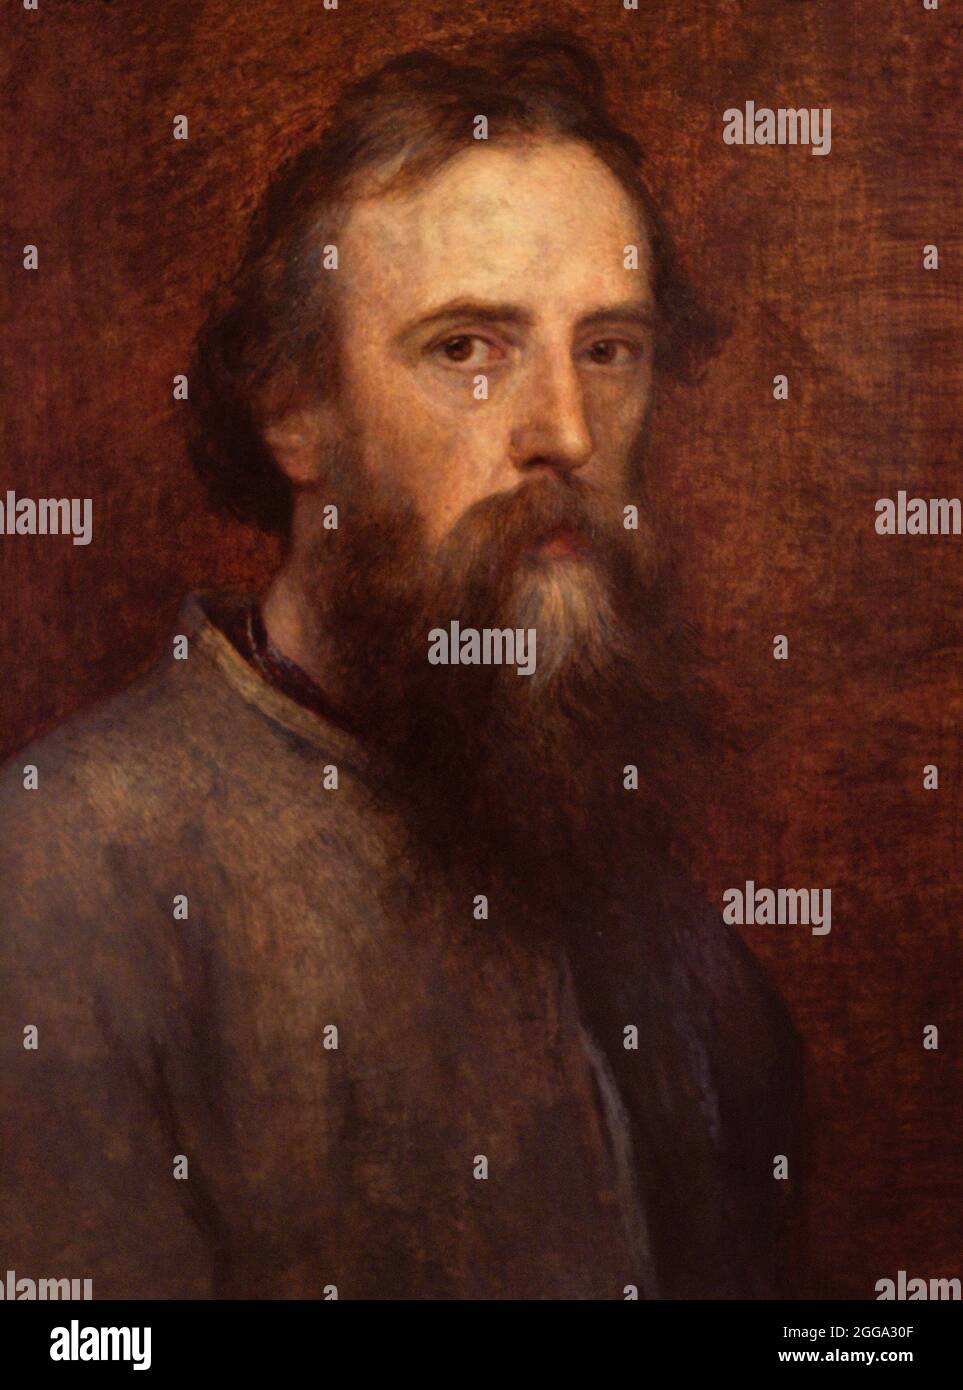 George Frederic Watts (1817-1904). English painter and sculptor. Self-portrait. Oil on panel (61 x 50,2 cm), ca.1860. National Portrait Gallery. London, England, United Kingdom. Stock Photo